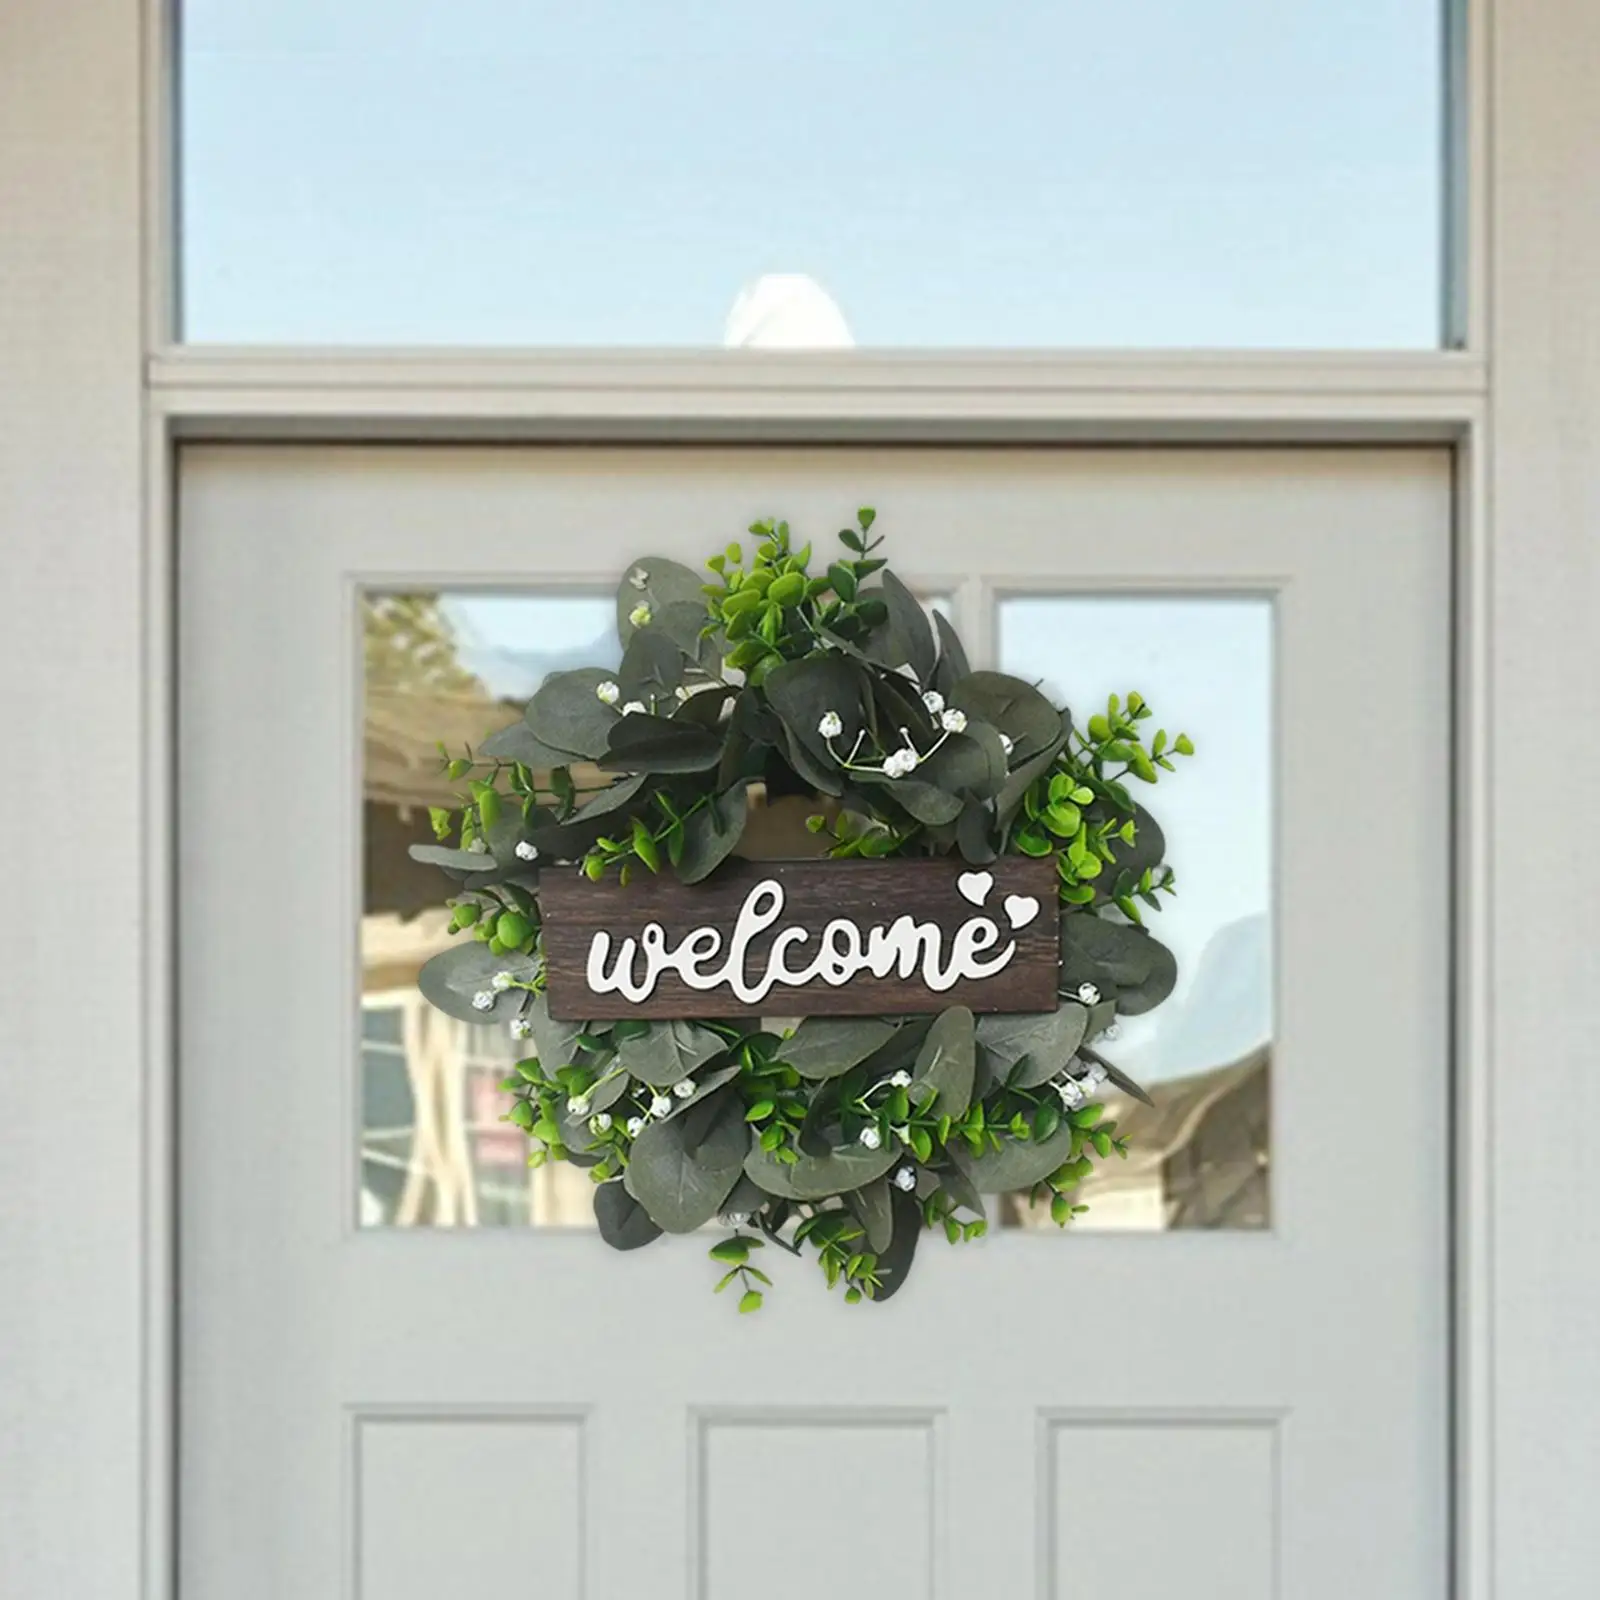 12inch Eucalyptus Wreath Green Leaves Simulation Ornament Door Hanging Garland for Party Farmhouse Holiday Windows Wall